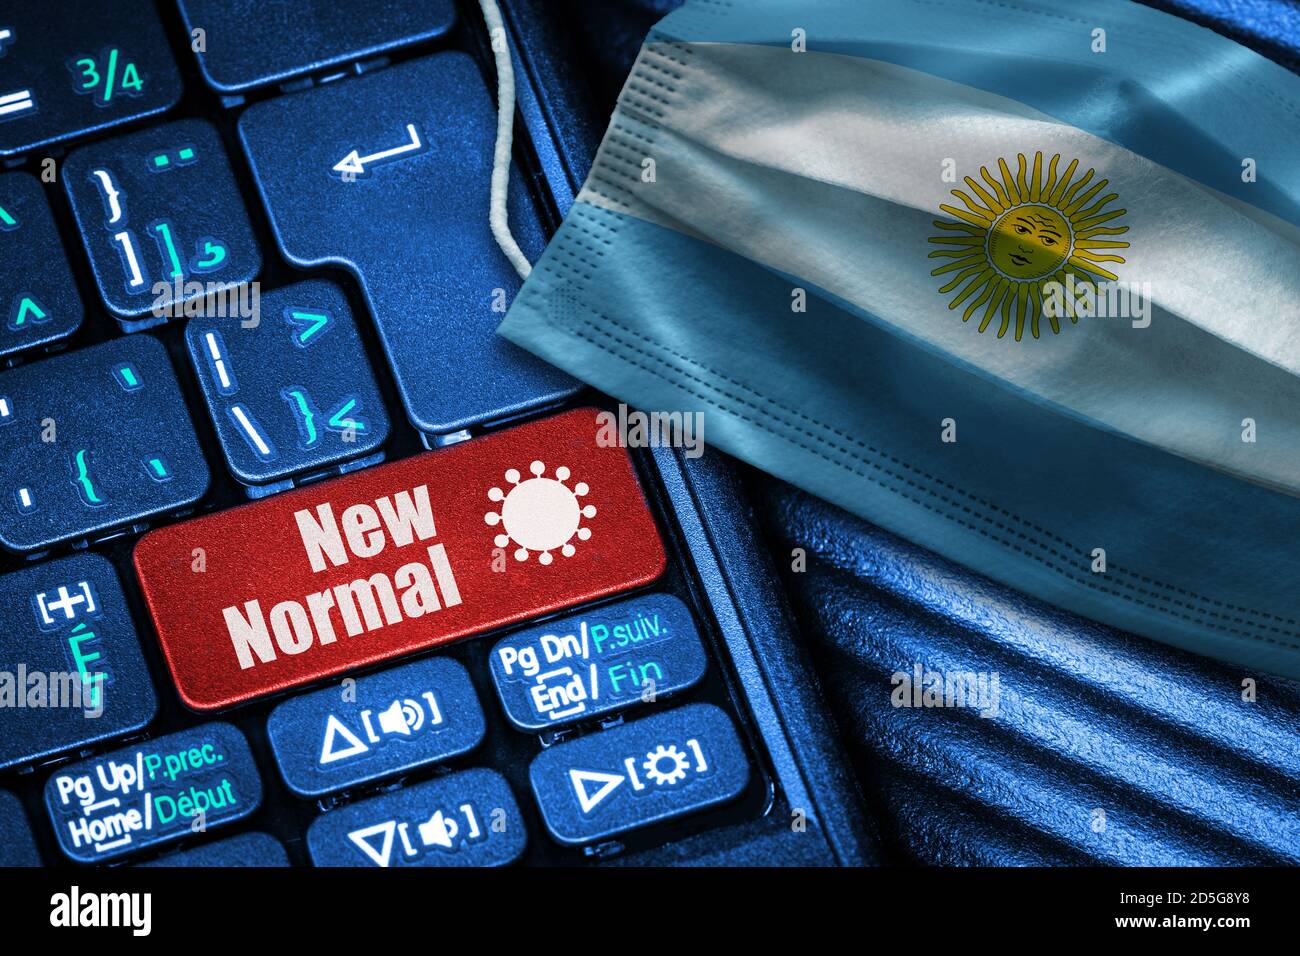 Concept of New Normal in Argentina during Covid-19 with computer keyboard red button text and face mask showing Argentinian Flag. Stock Photo